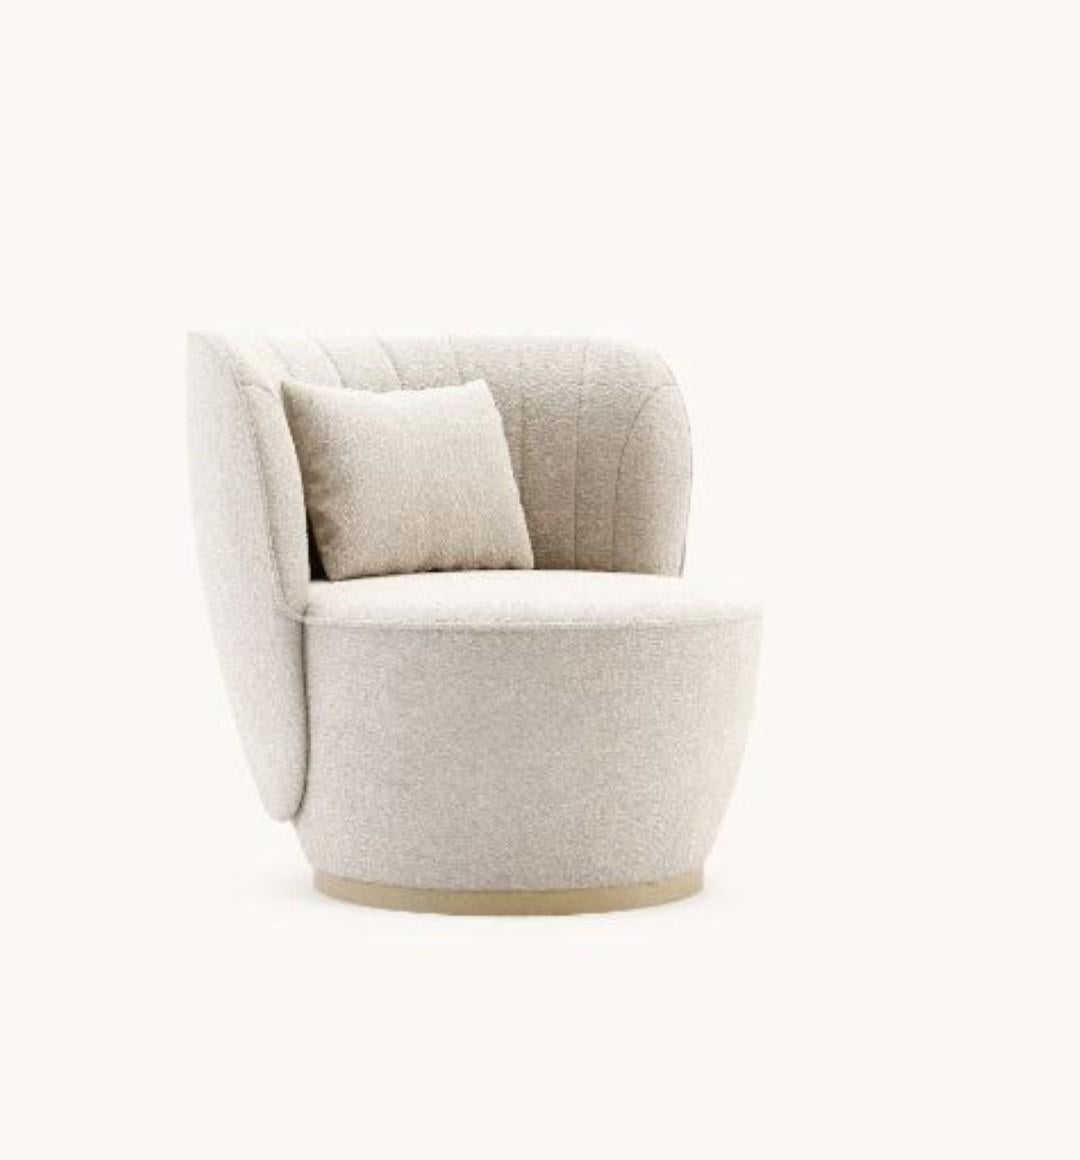 Pearl Armchair by Domkapa
Materials: Natural Ash, Bouclé. 
Dimensions:  W 88 x D 82 x H 78 cm. 
Also available in different materials. Please contact us.

Pearl armchair holds an exclusive language for its peculiar design. With a deep convex back,